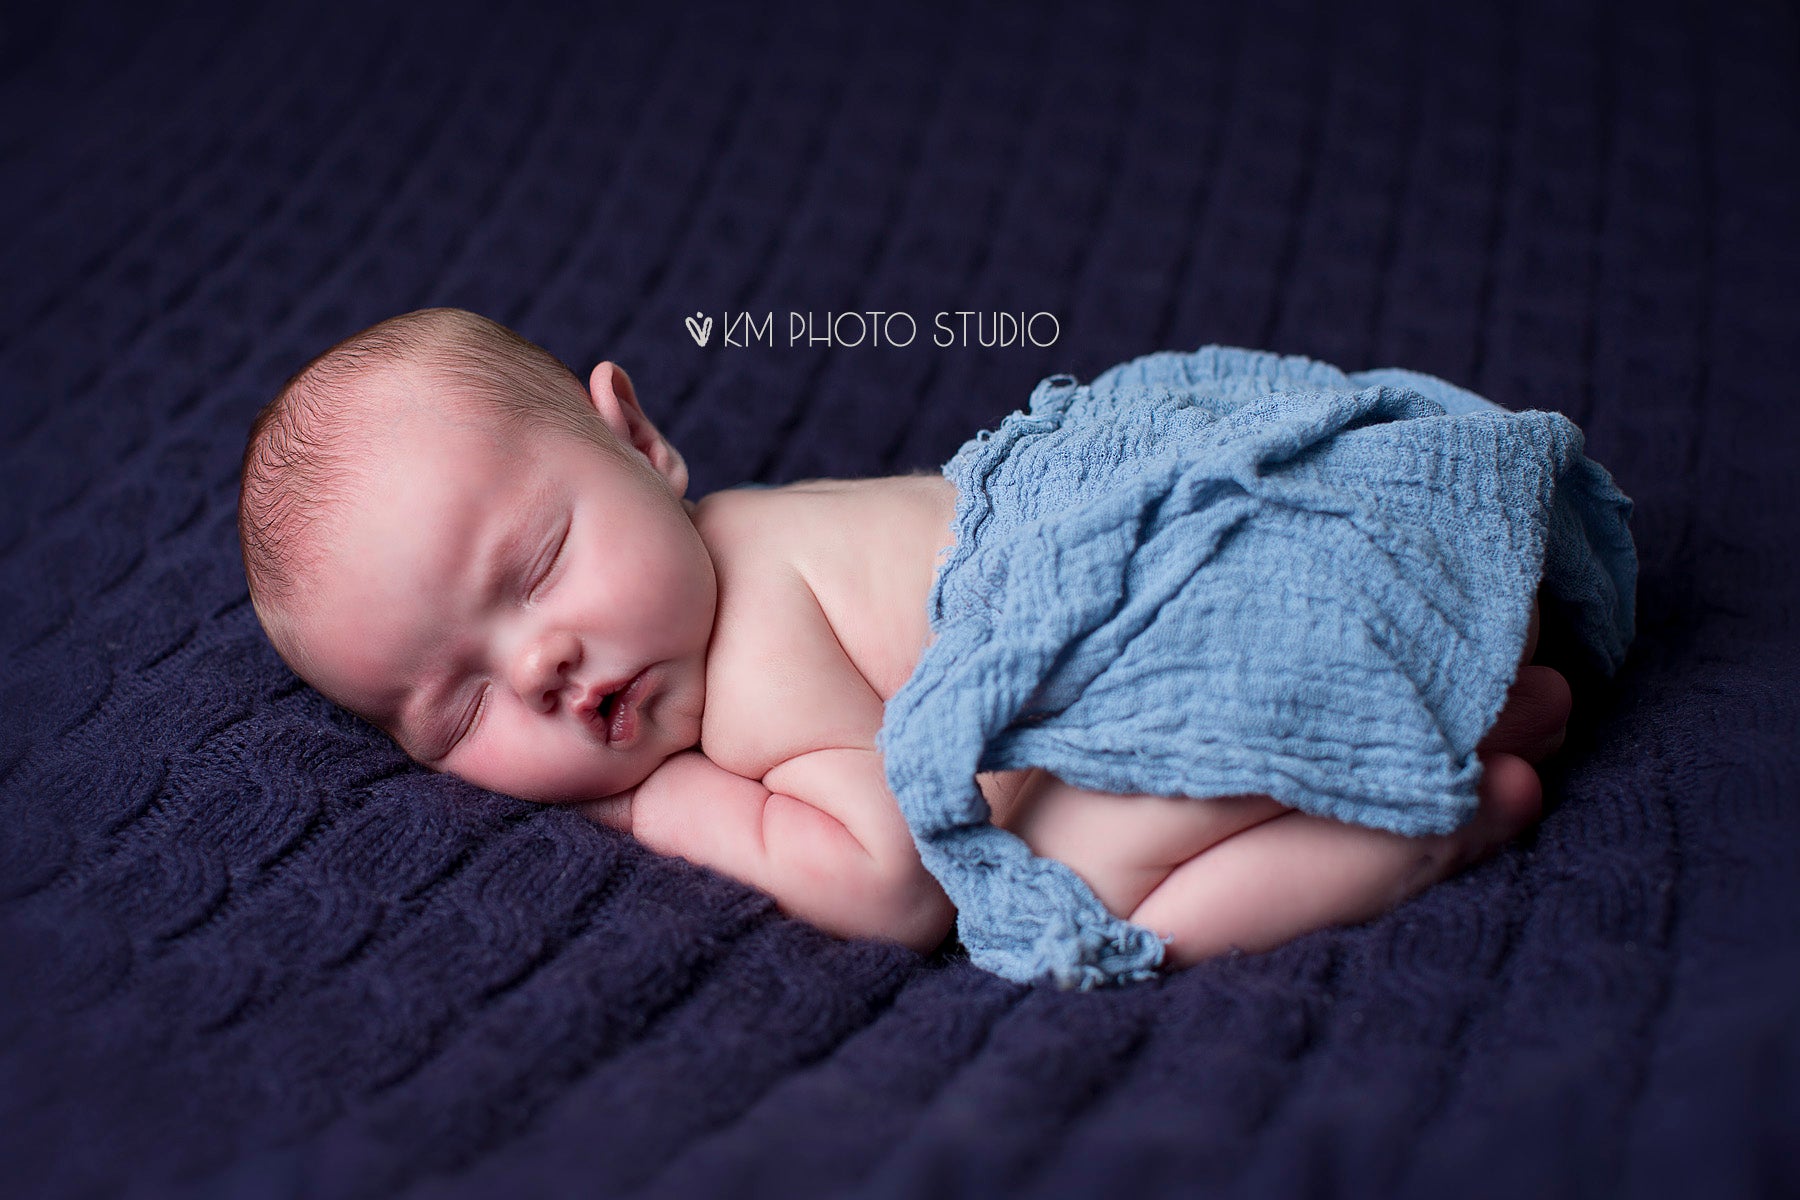 Newborn baby on napping on blue blanket